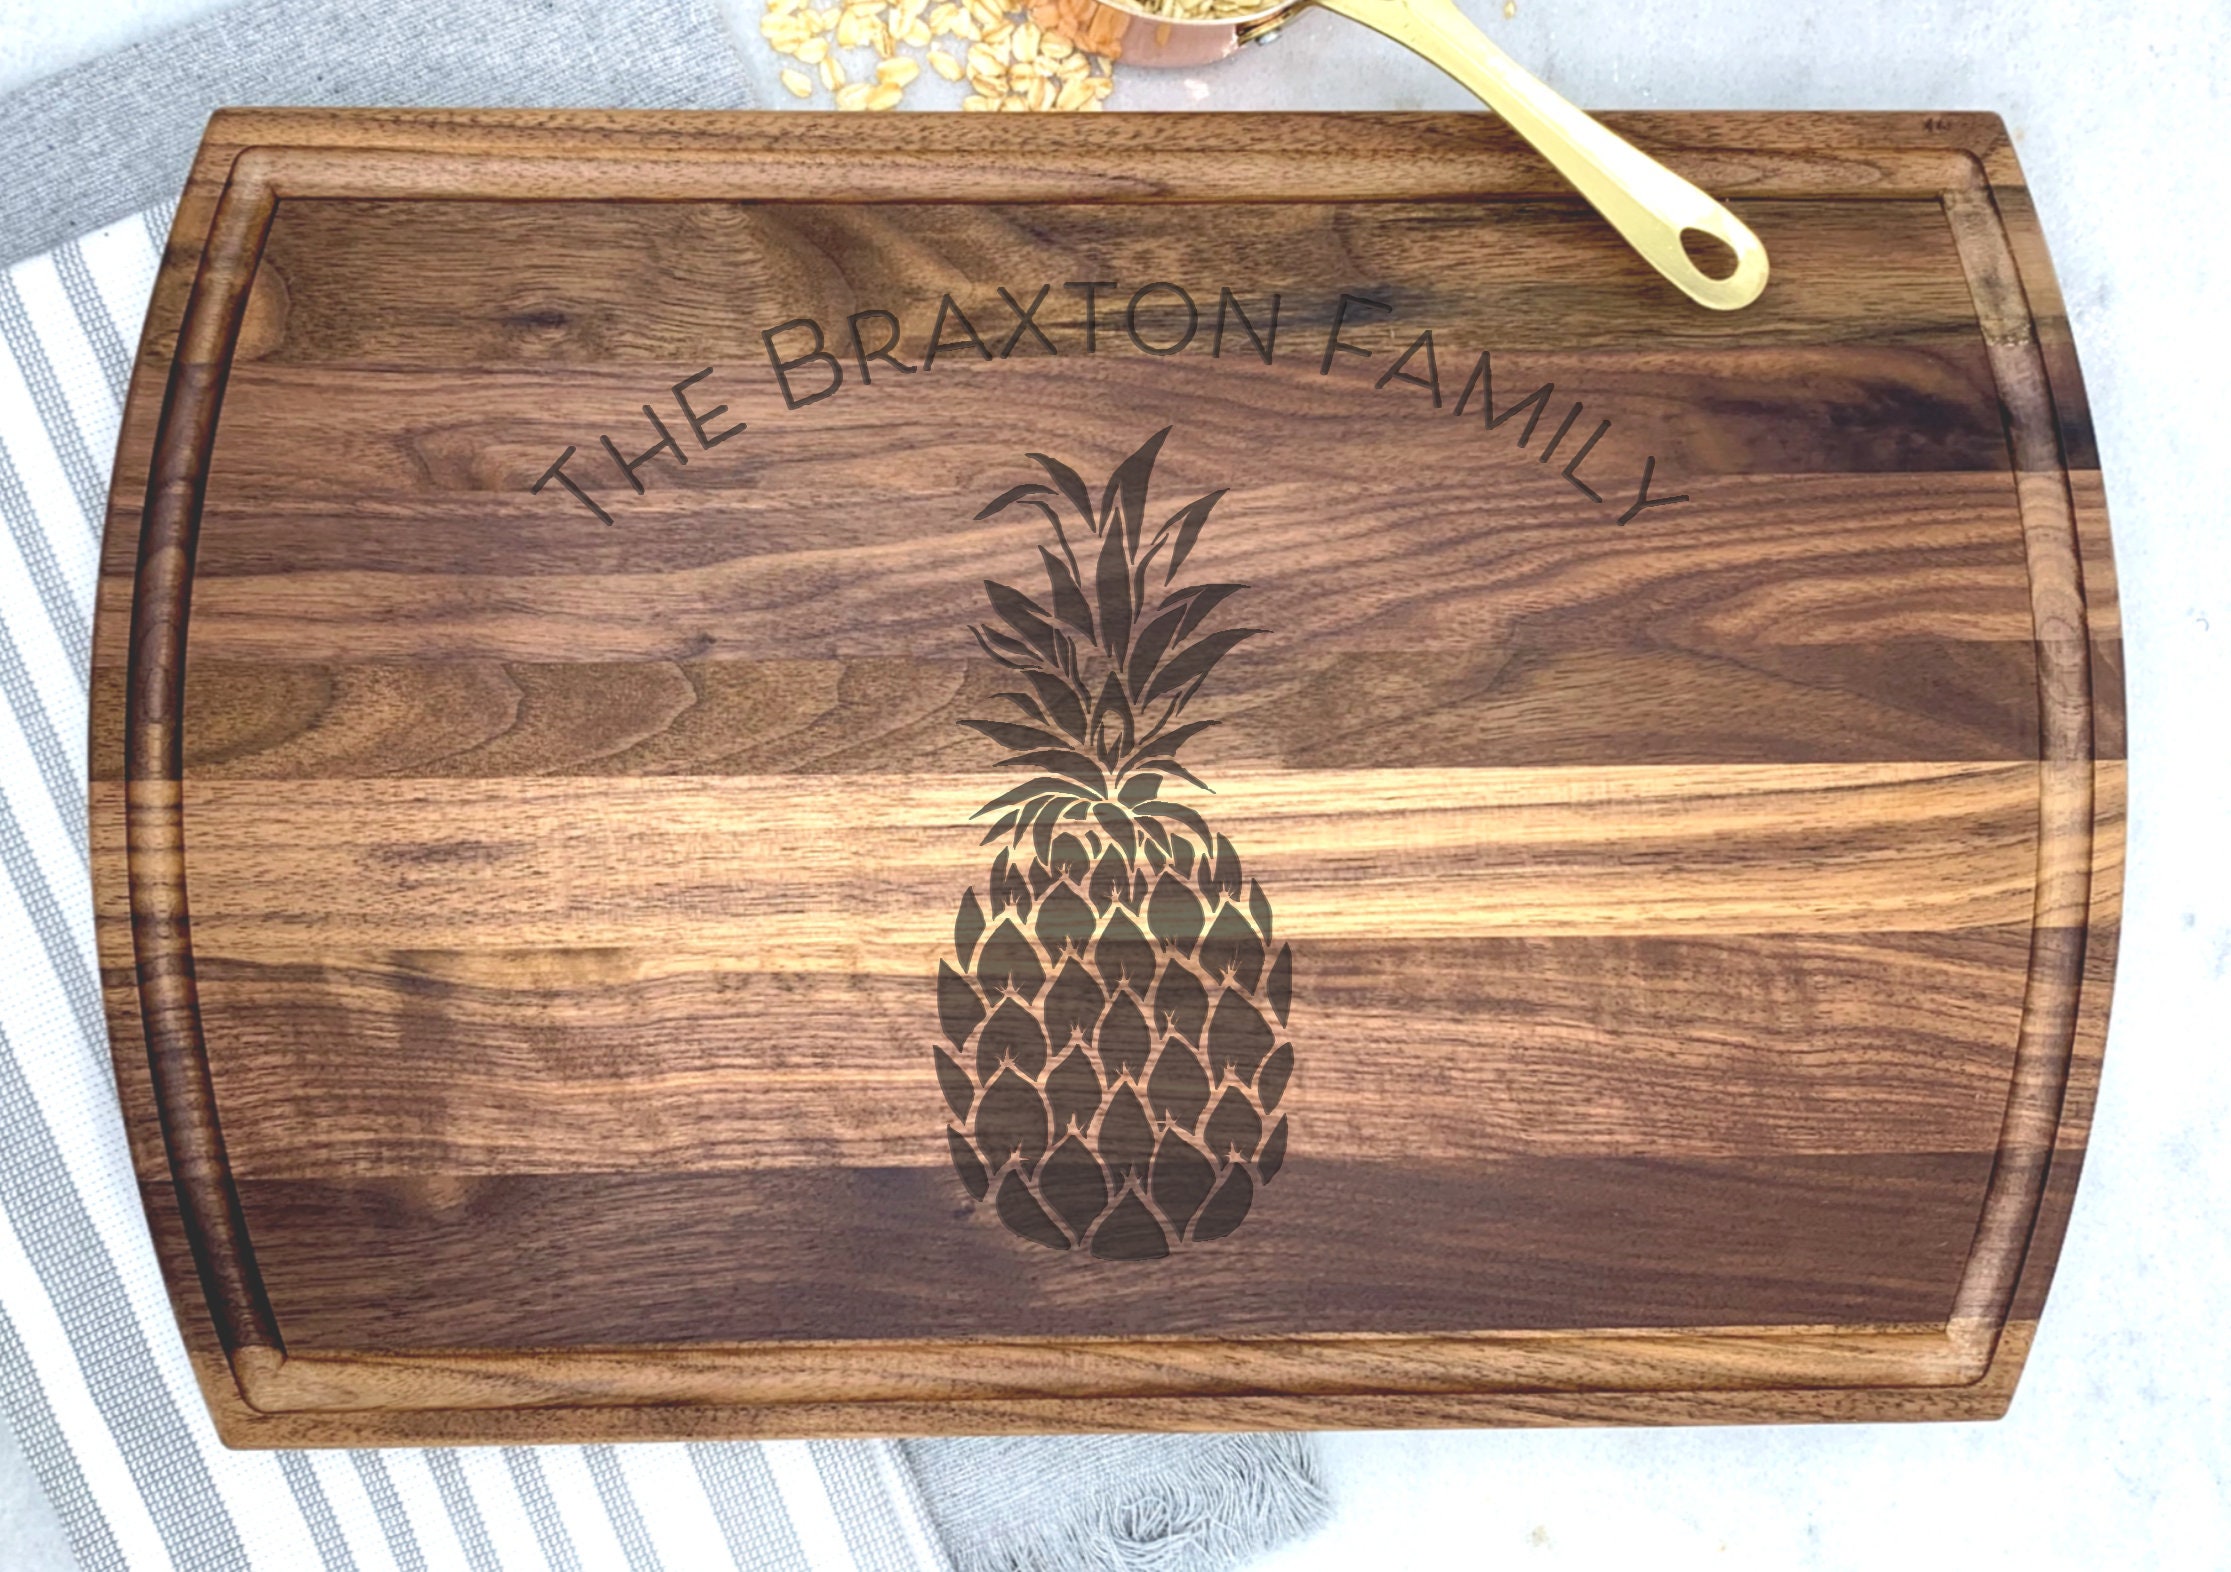 Made in Hawaii wooden cutting board - Pineapple – Red Pineapple